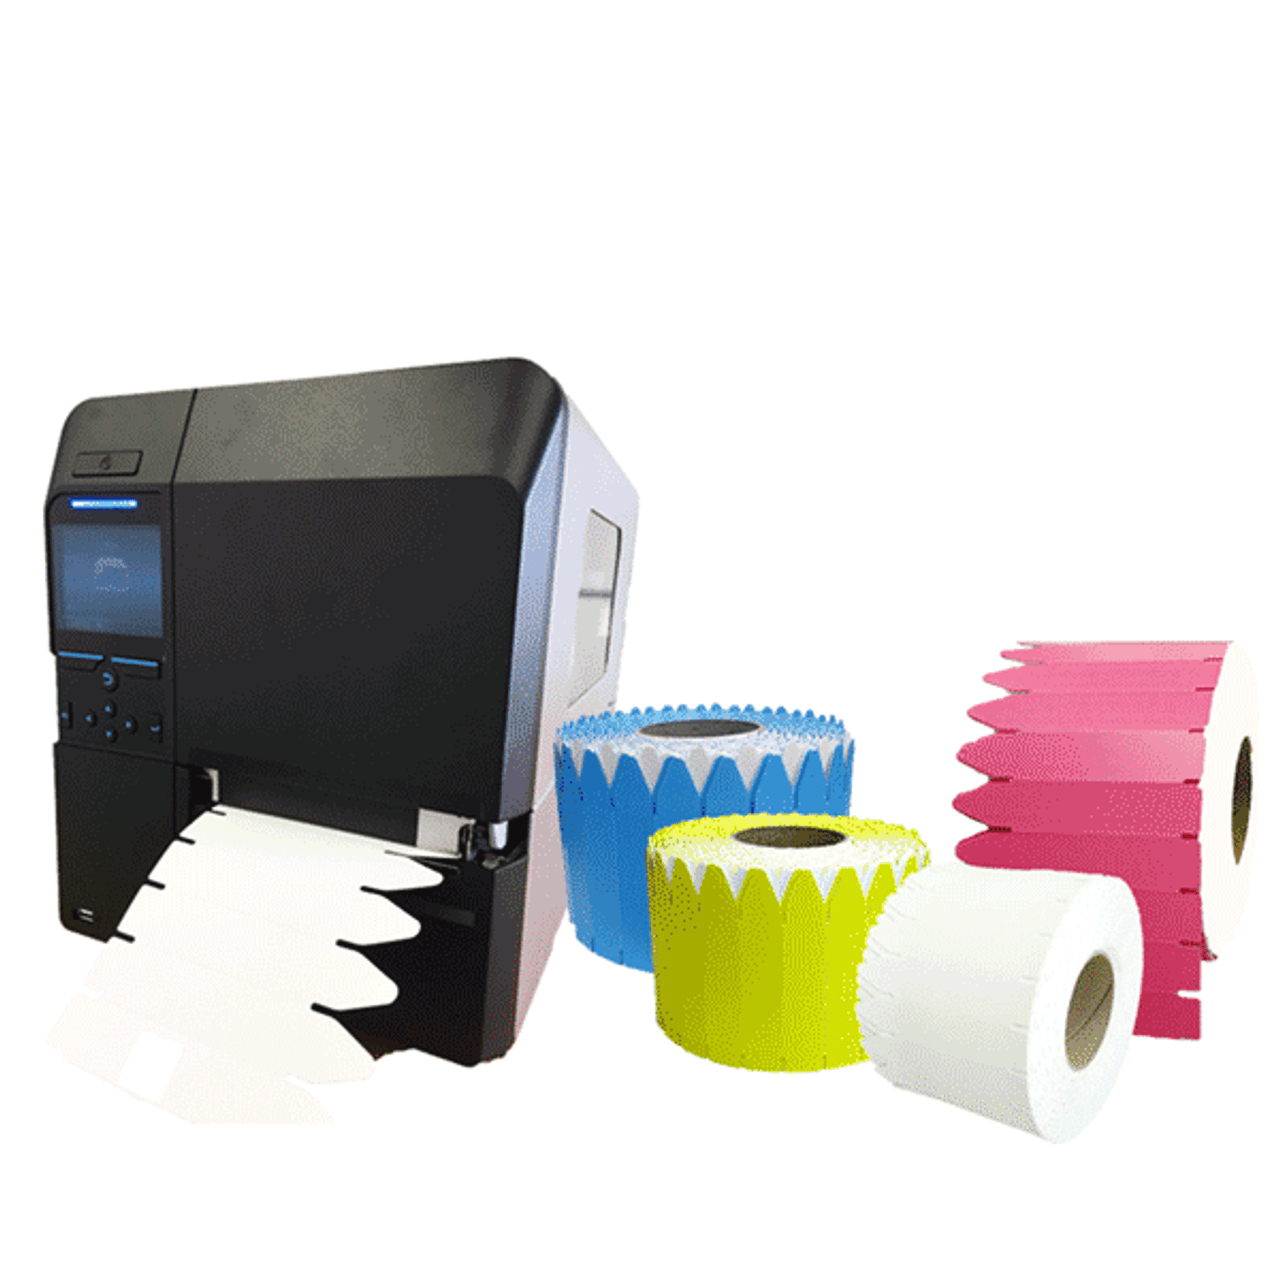 Plant Tags Printer Solution-Plant tags and